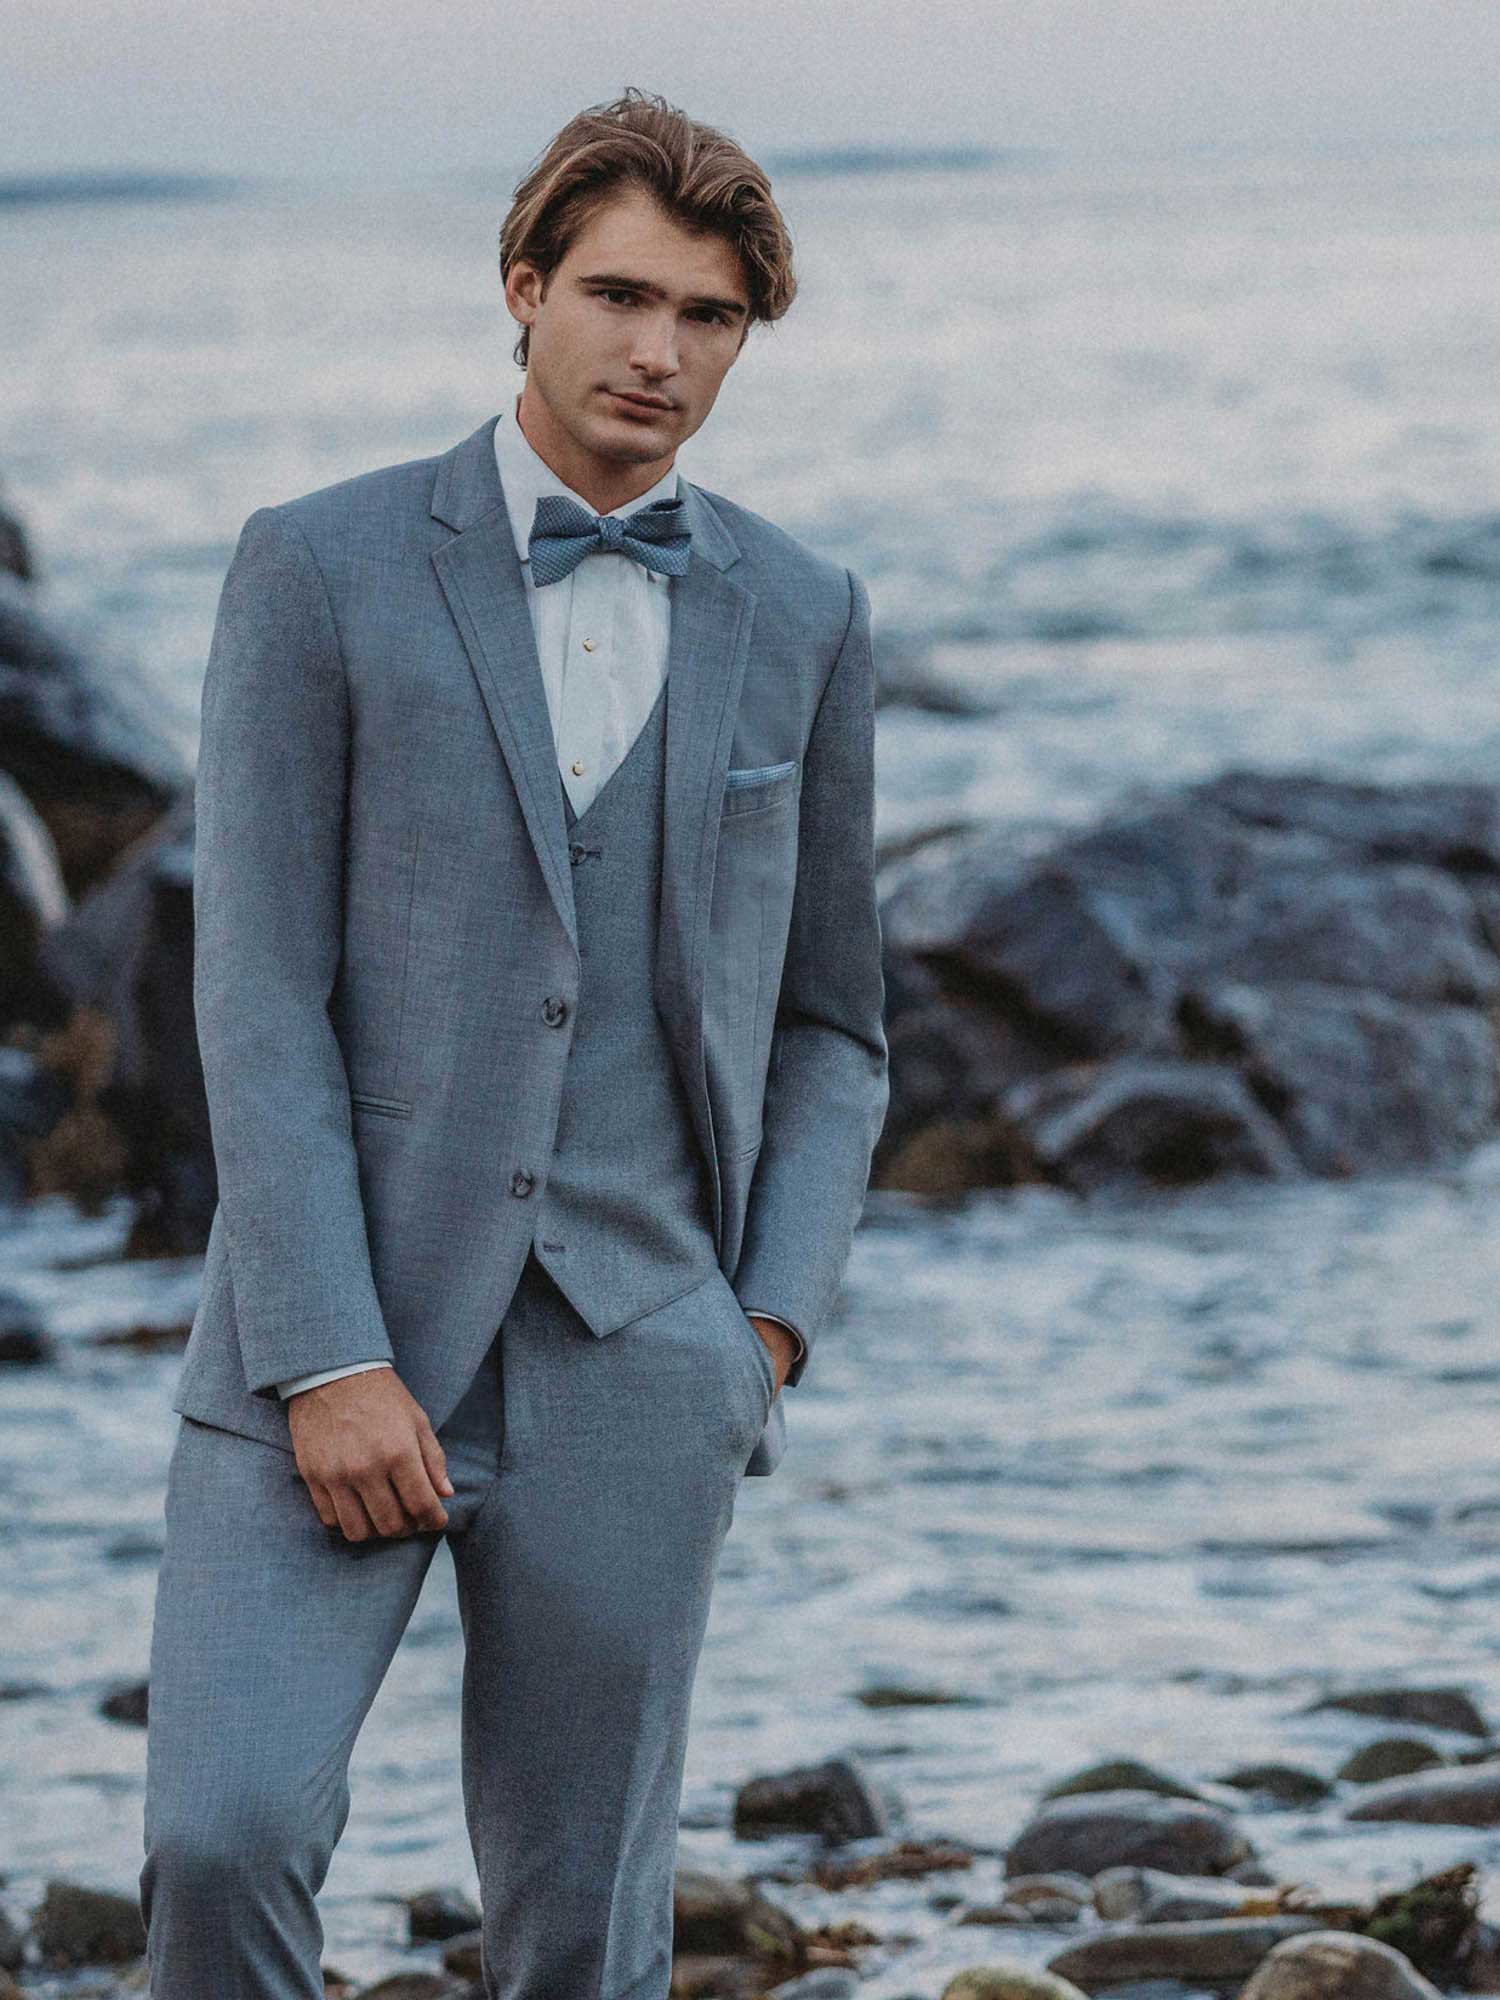 Model wearing a gray suit. Mobile image